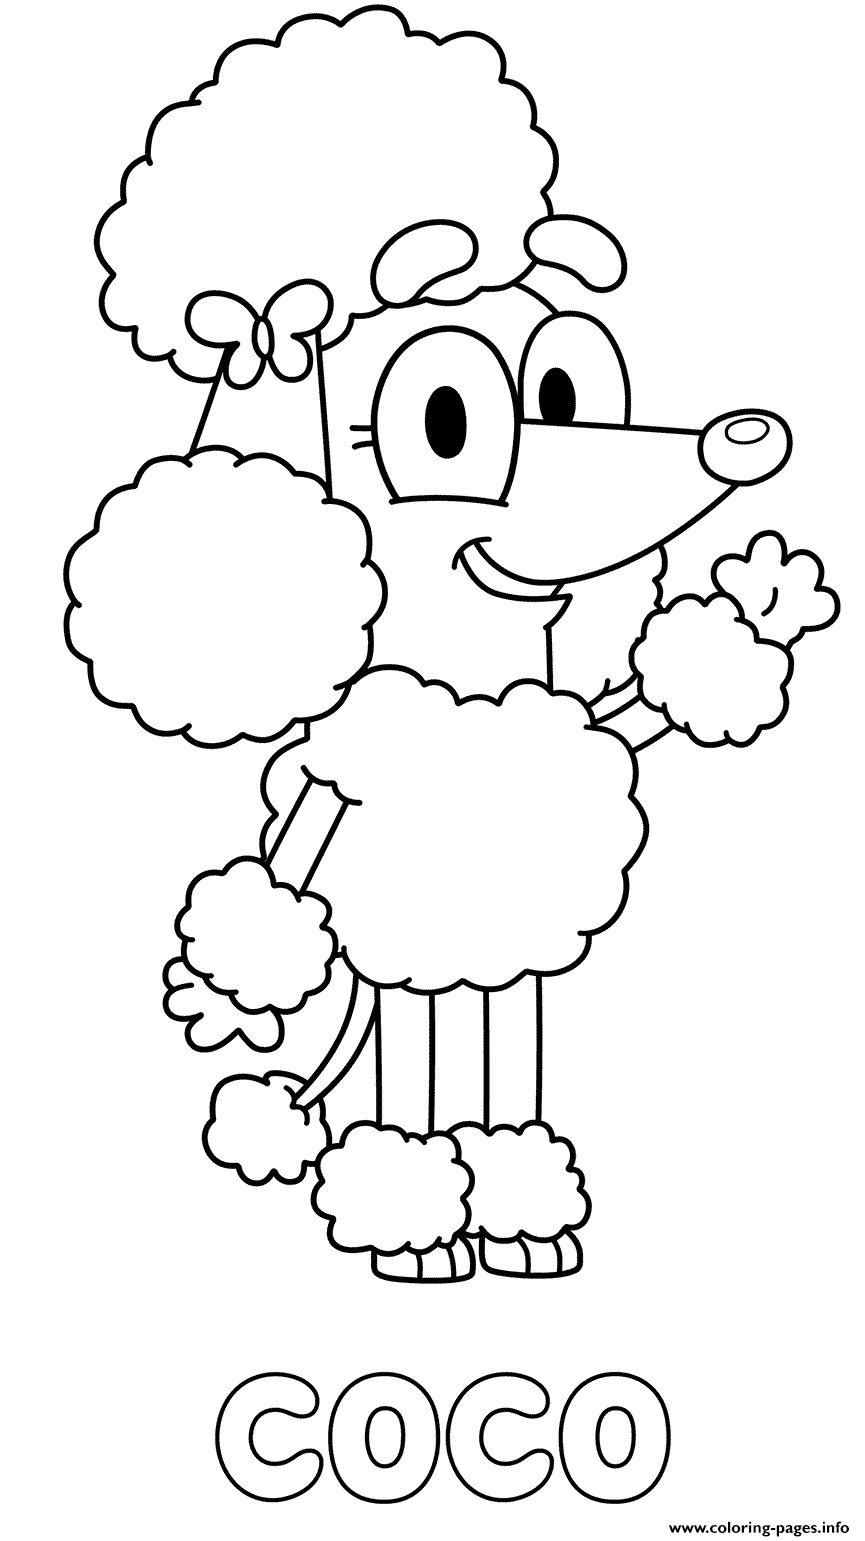 Poodle Coco Coloring Pages Printable